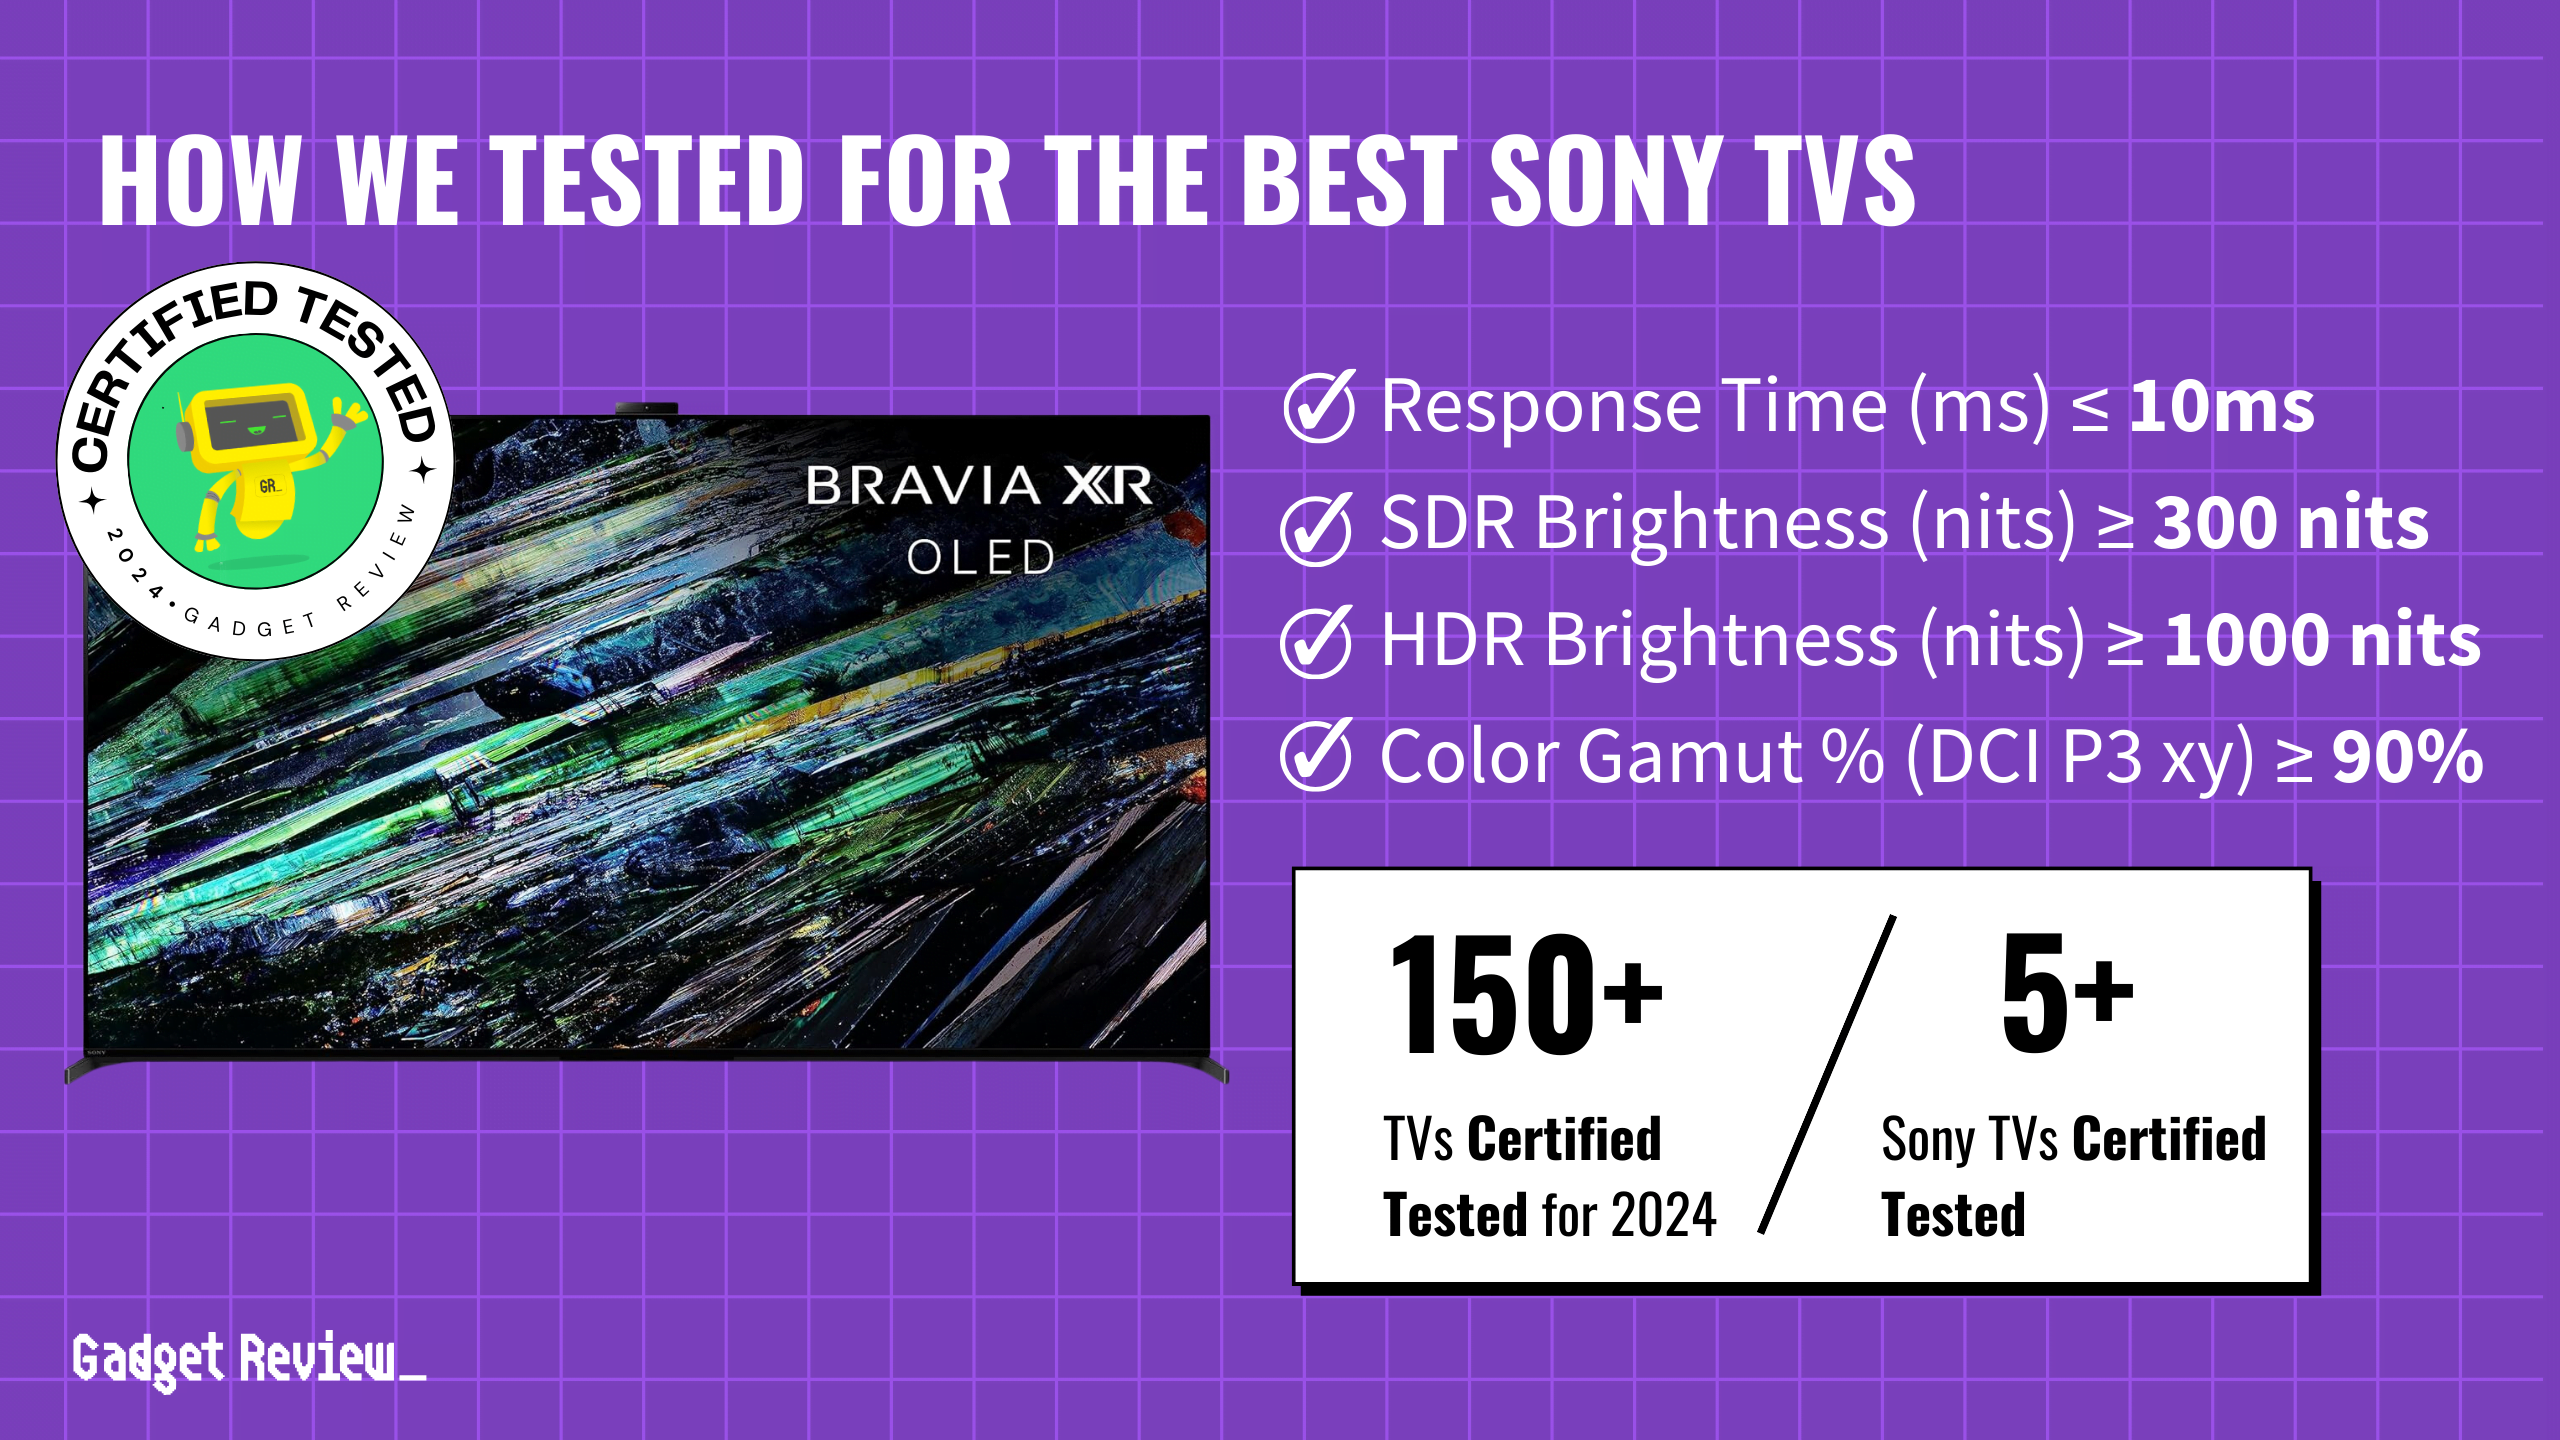 How We Ranked The 3 Best Sony TVs